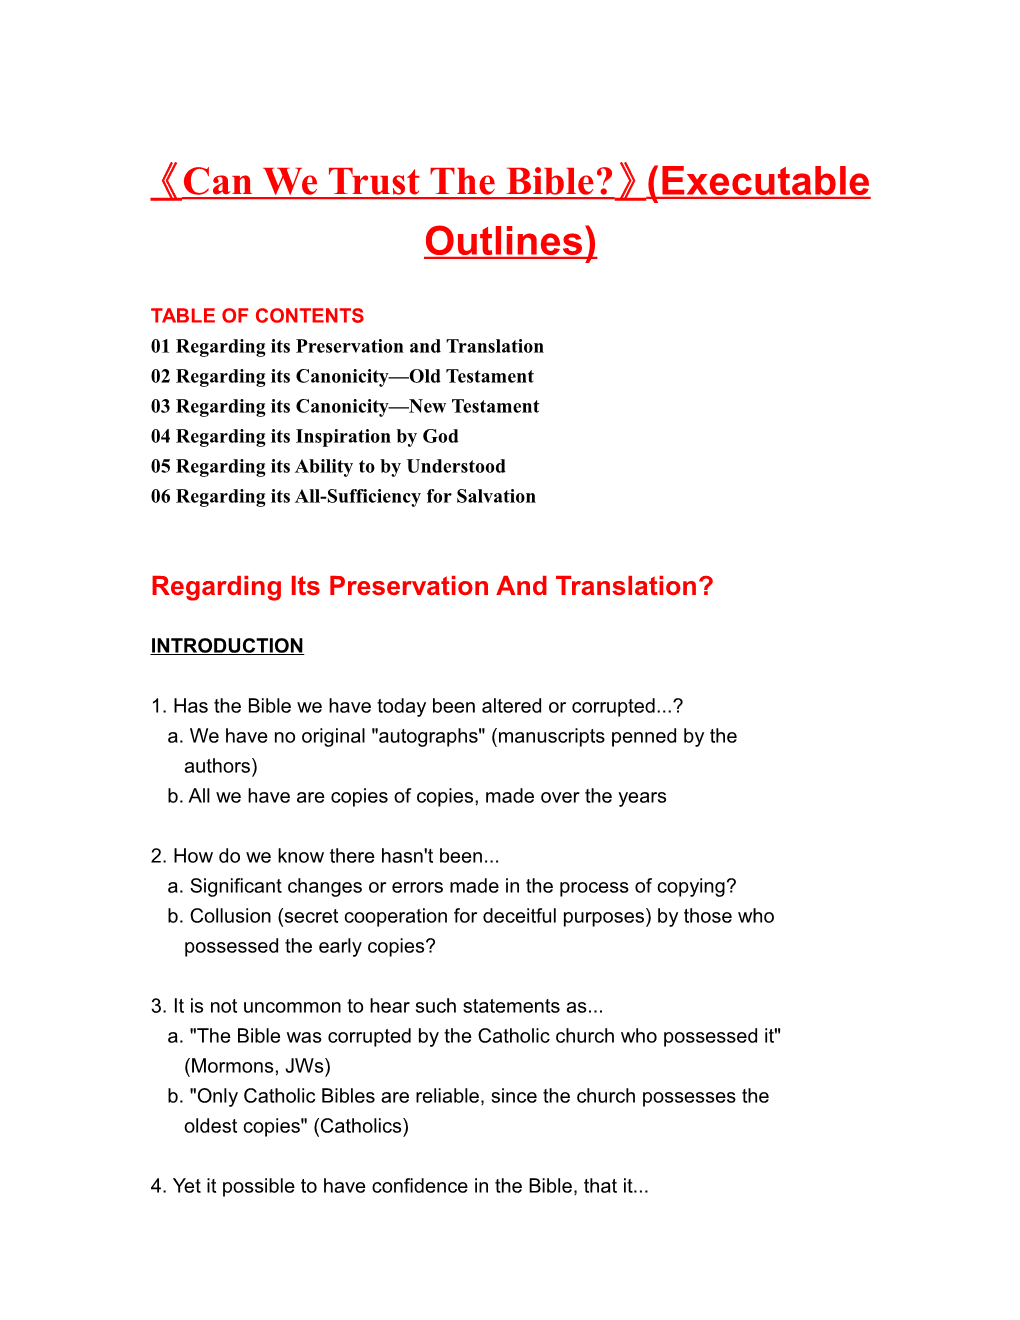 Can We Trust the Bible? (Executable Outlines)